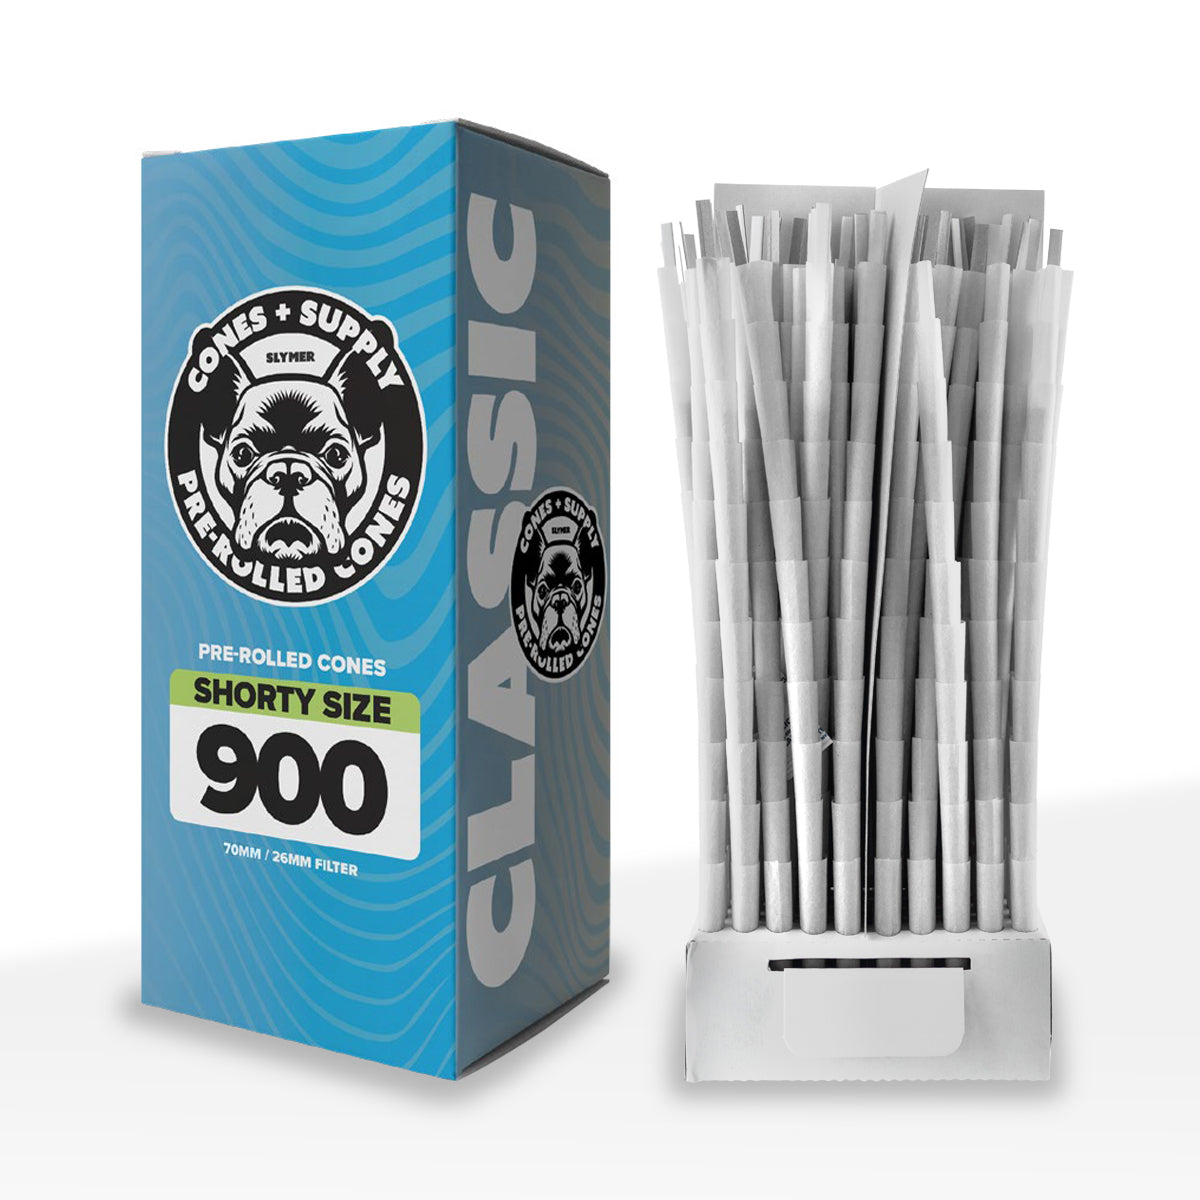 CONES + SUPPLY | Dog Walker Pre-rolled Cones | 70mm  - Various Styles - 900 Count - White Paper